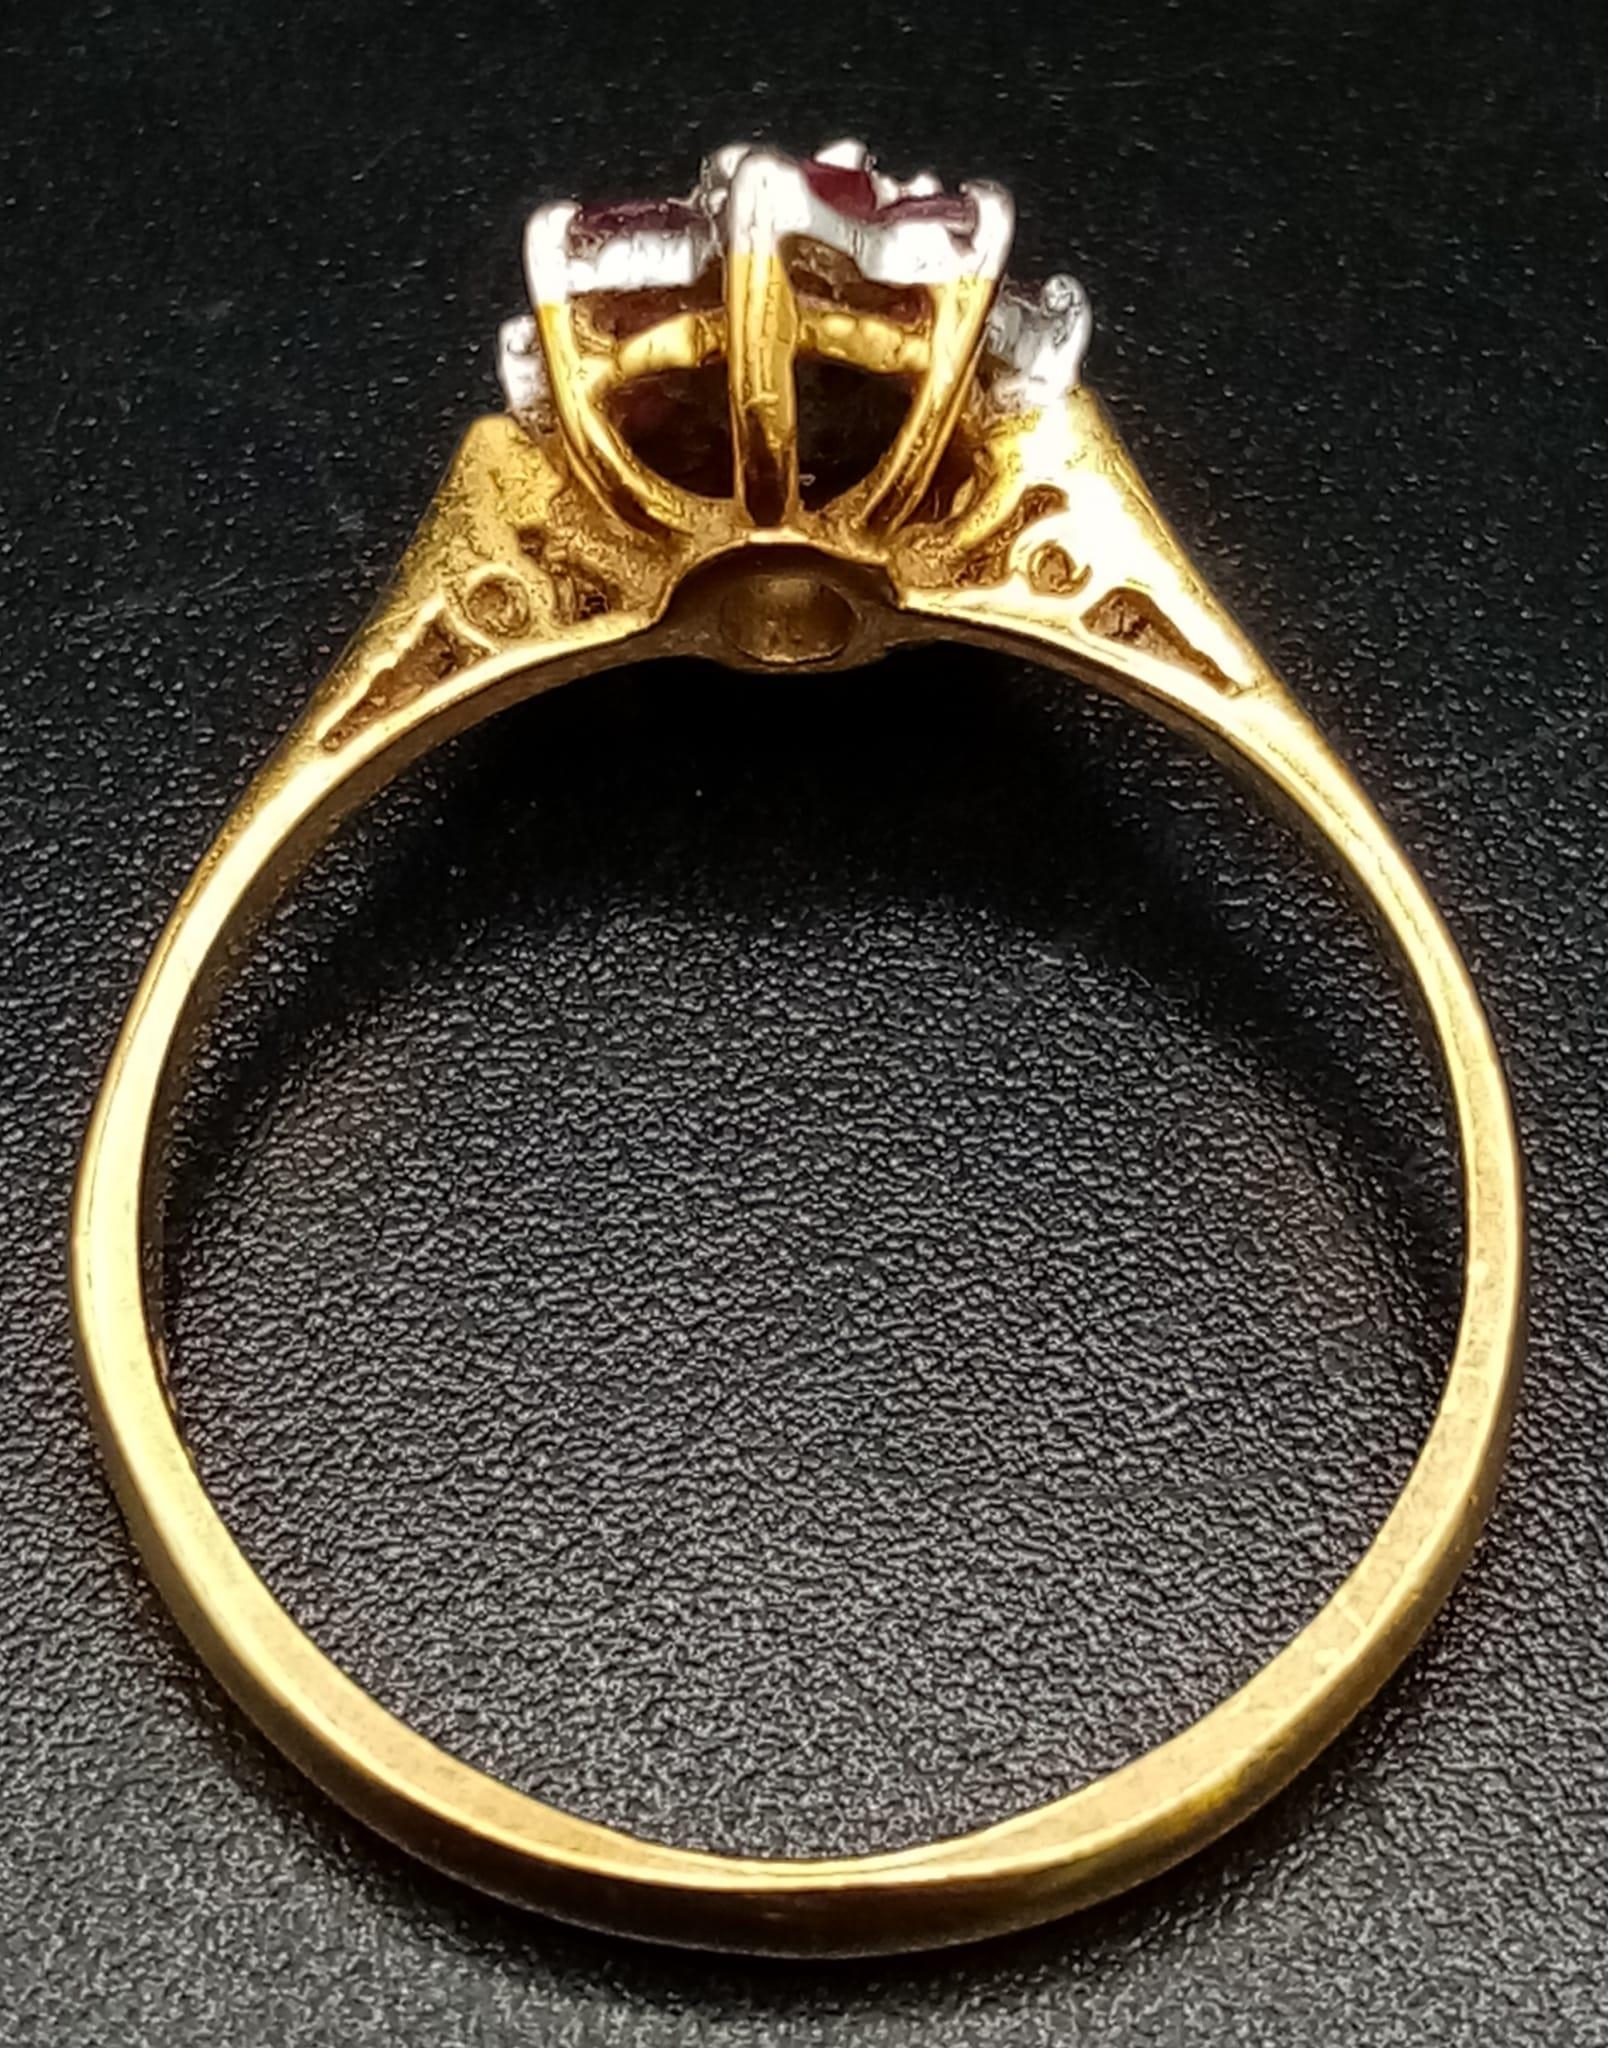 An 18K Yellow Gold Ruby and Diamond Ring. Central small diamond with a ruby gemstone halo. Size M - Image 4 of 5